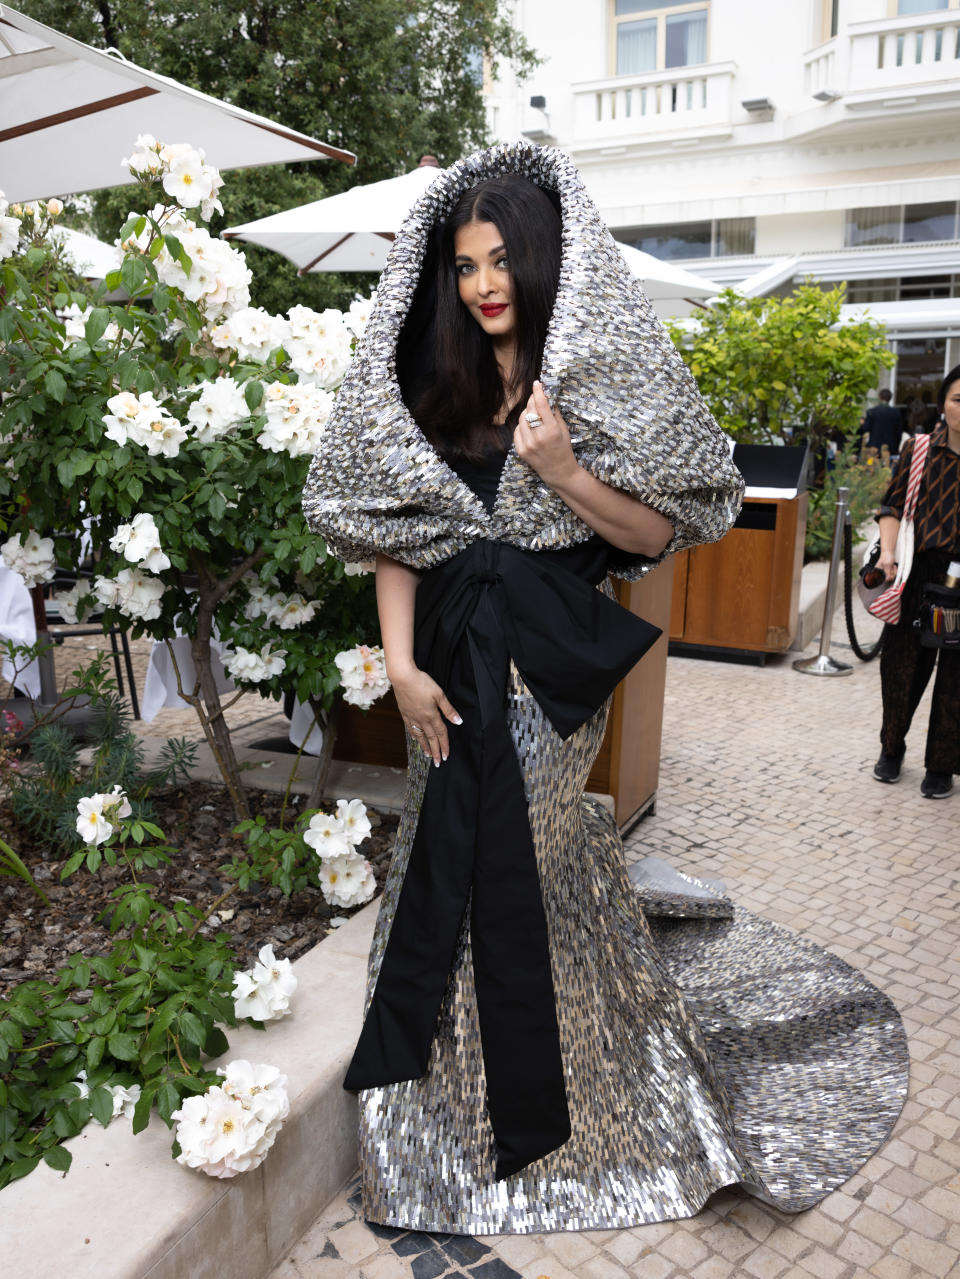 CANNES, FRANCE - MAY 18: Aishwarya Rai is seen at the Martinez hotel during the 76th Cannes film festival on May 18, 2023 in Cannes, France. (Photo by Arnold Jerocki/GC Images)